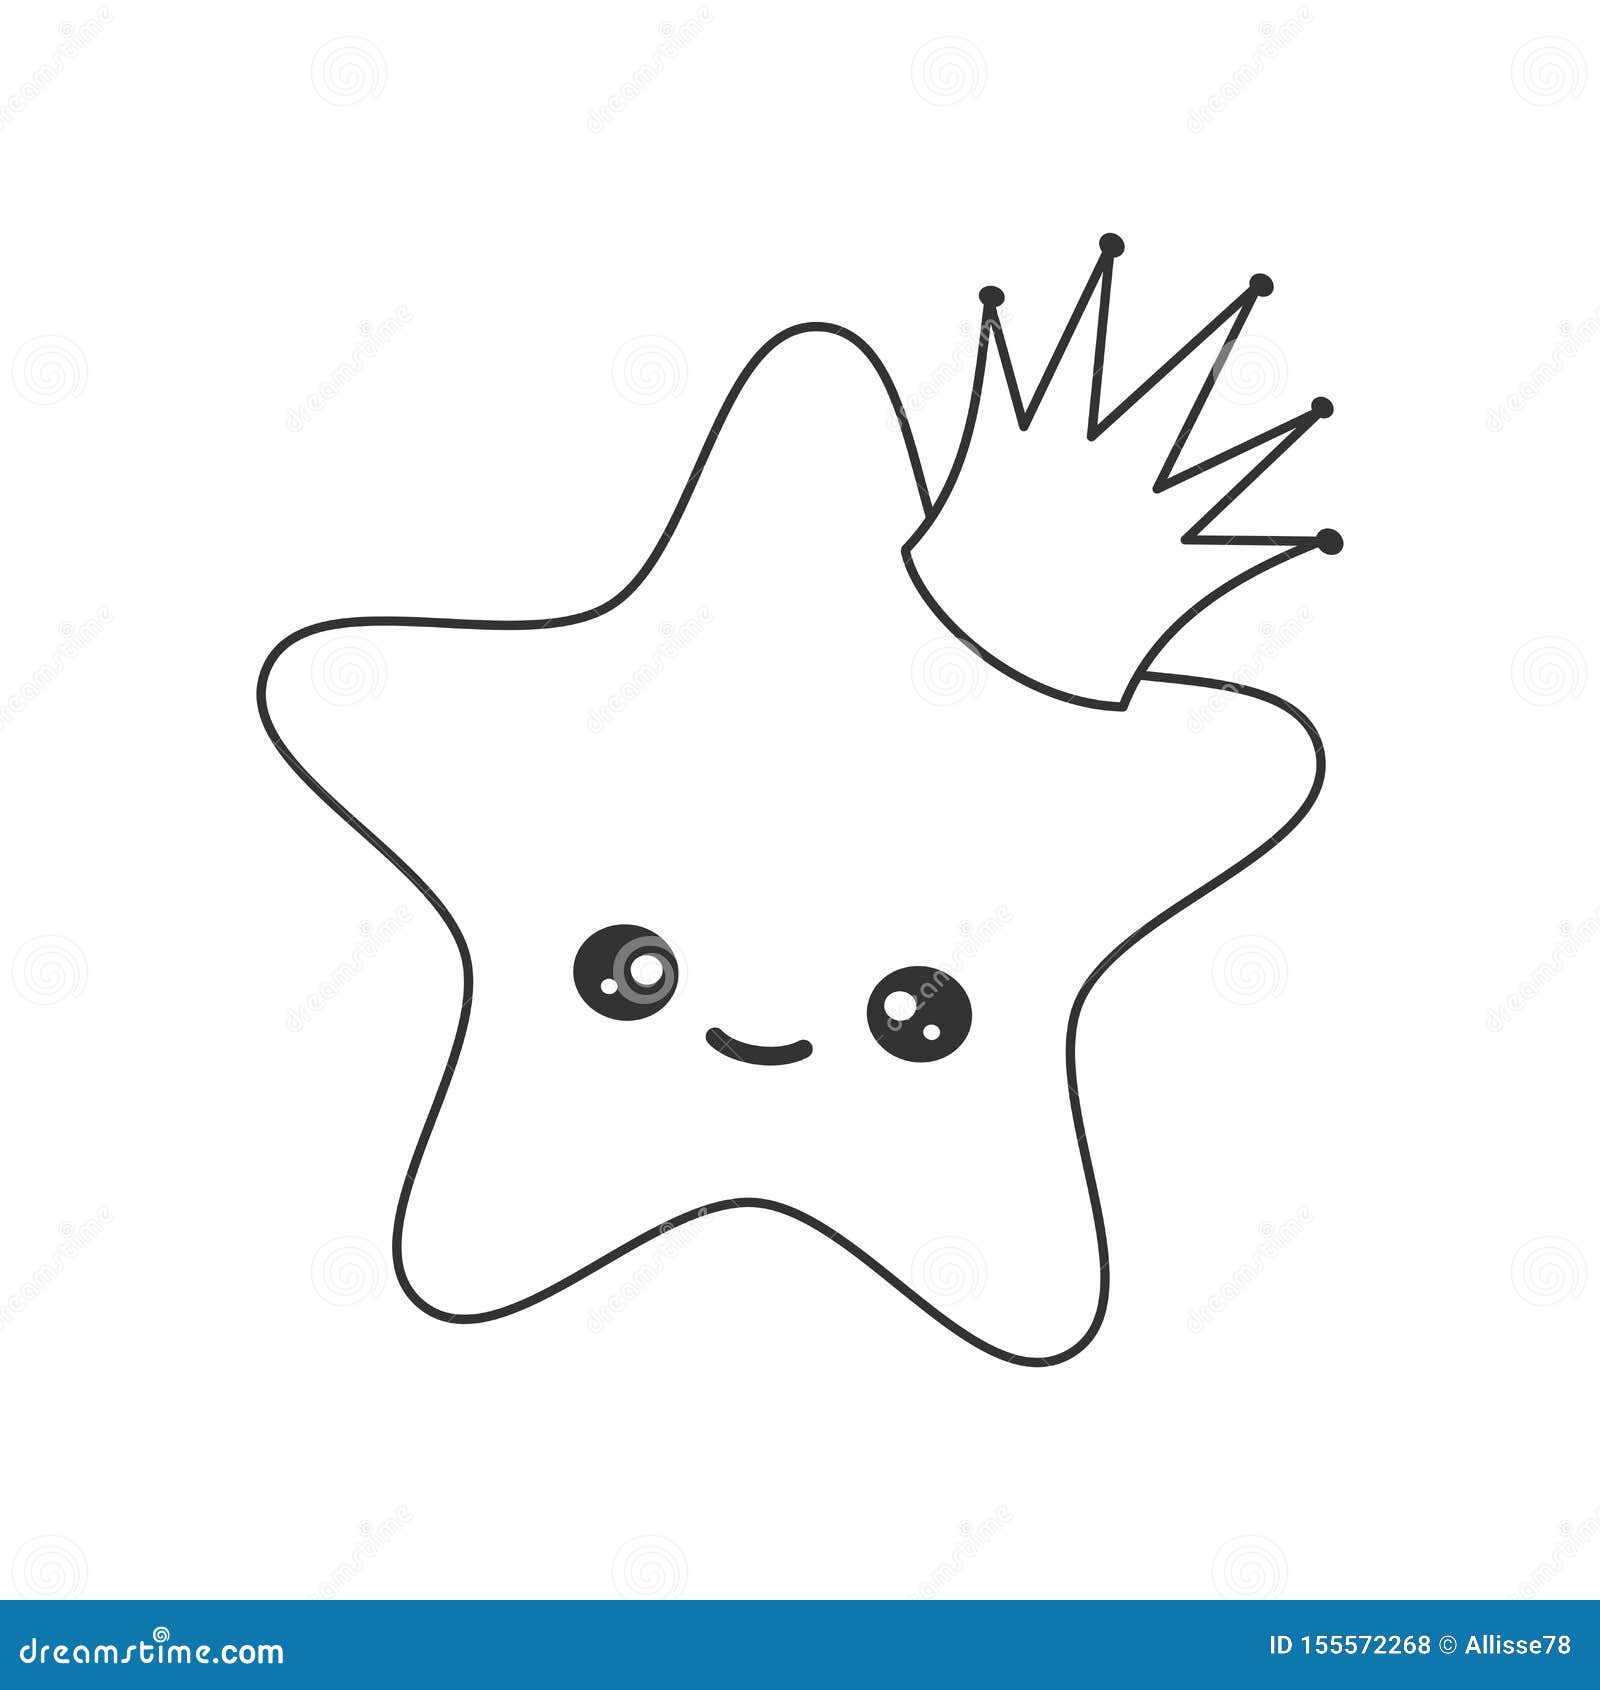 Cute Hand Drawn Black and White Cartoon Star with Crown Vector ...